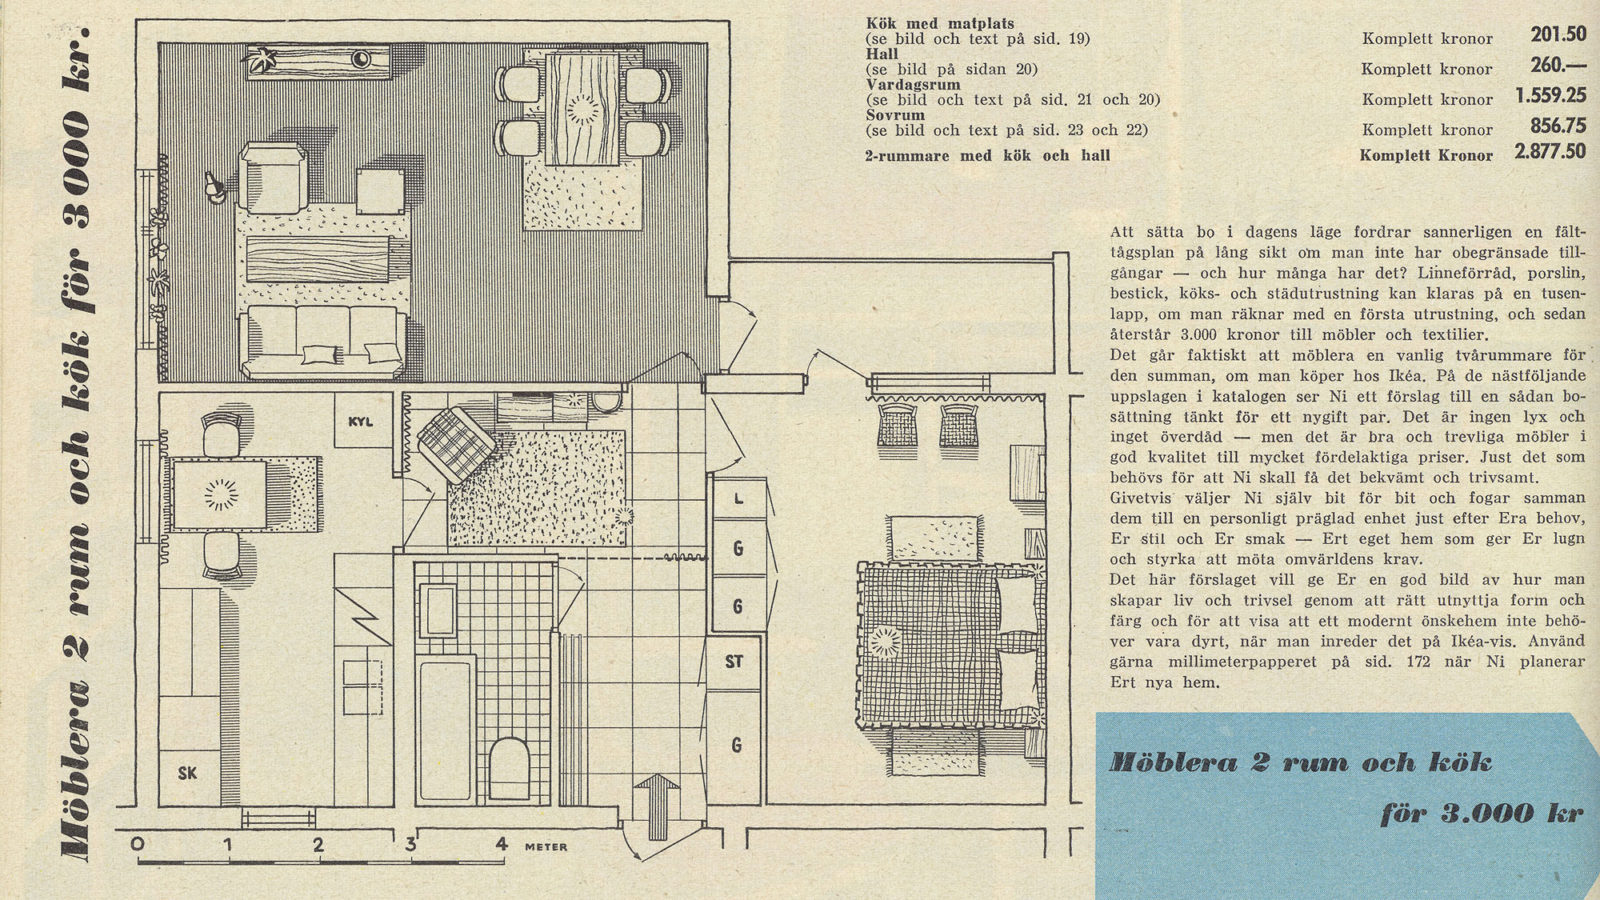 Page from catalogue with line drawing of one-bedroom apartment next to description and price list.